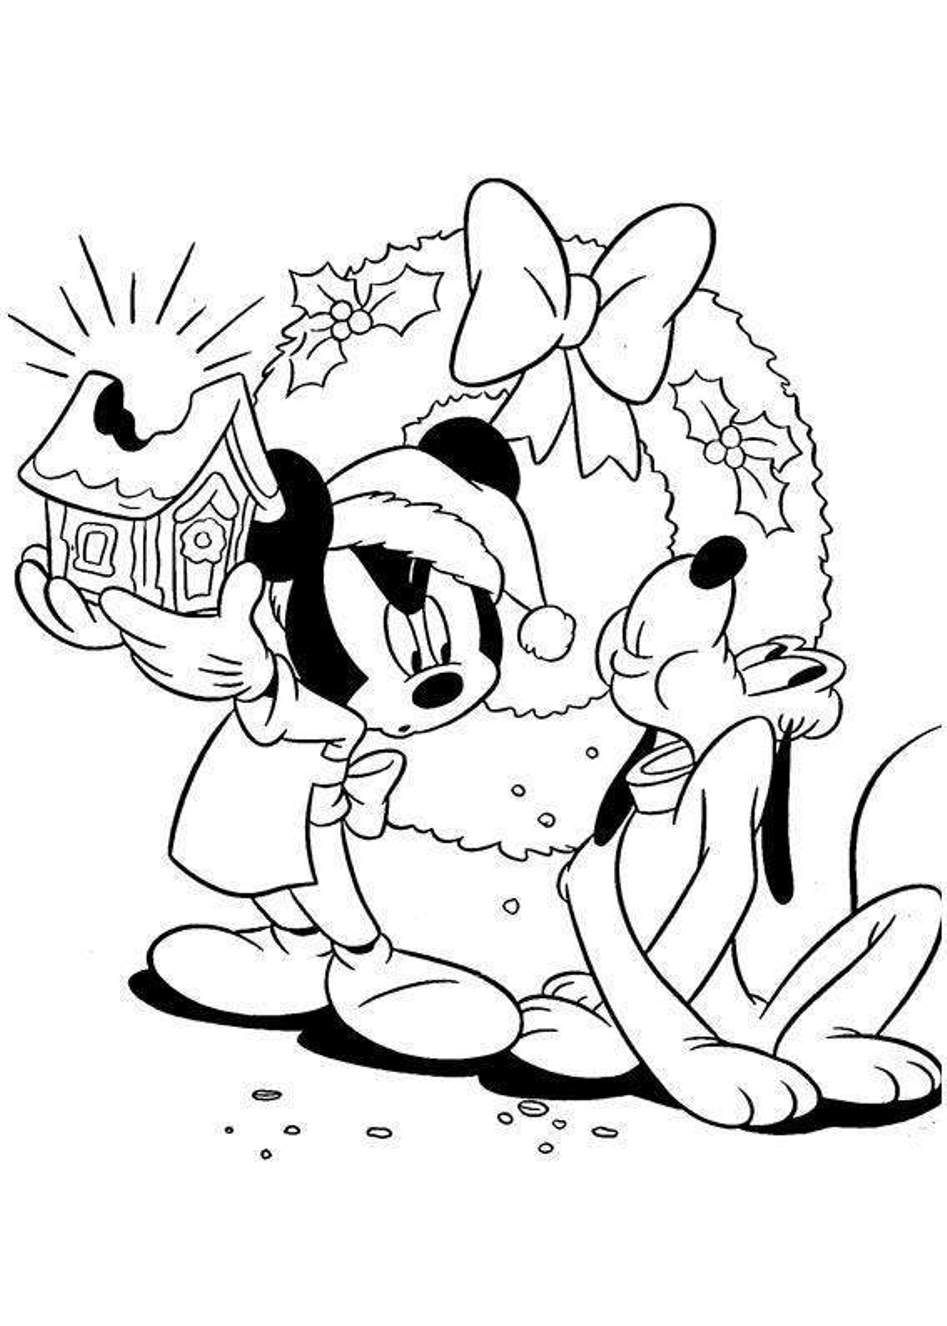 Mickey mouse christmas coloring pages to download and print for free